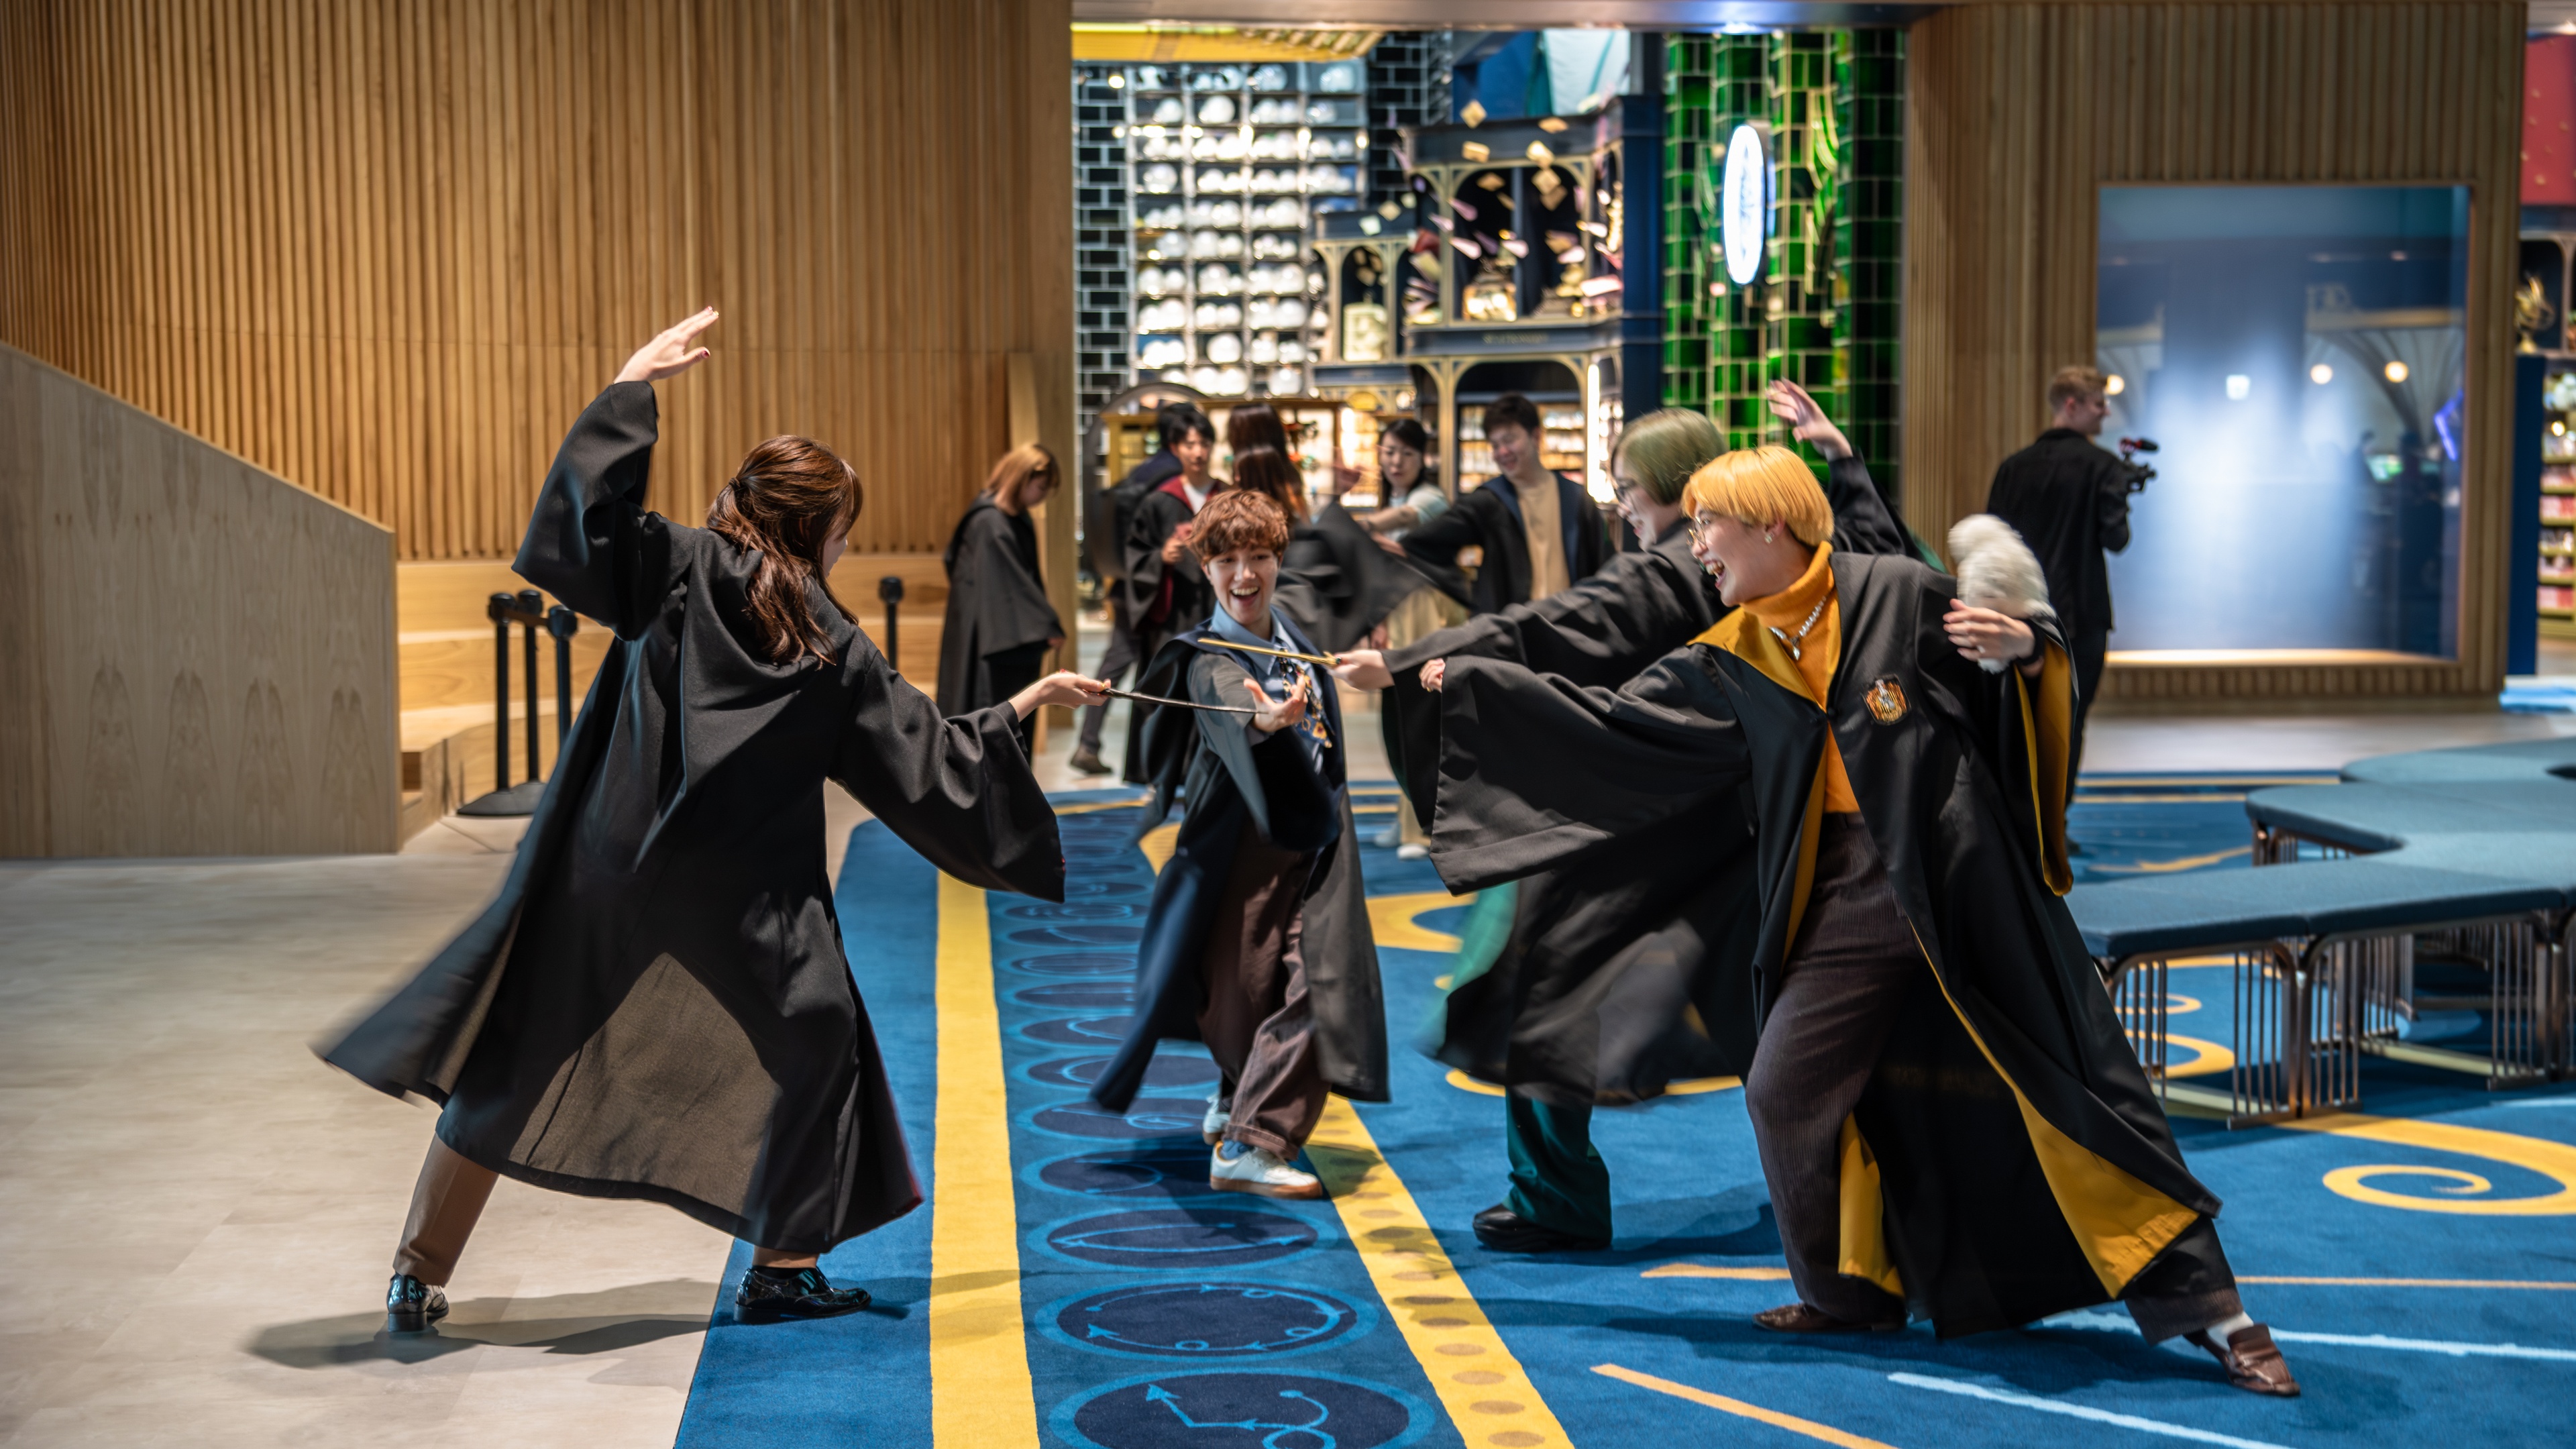 Children cosplay Harry Potter with wands in large entrance lobby